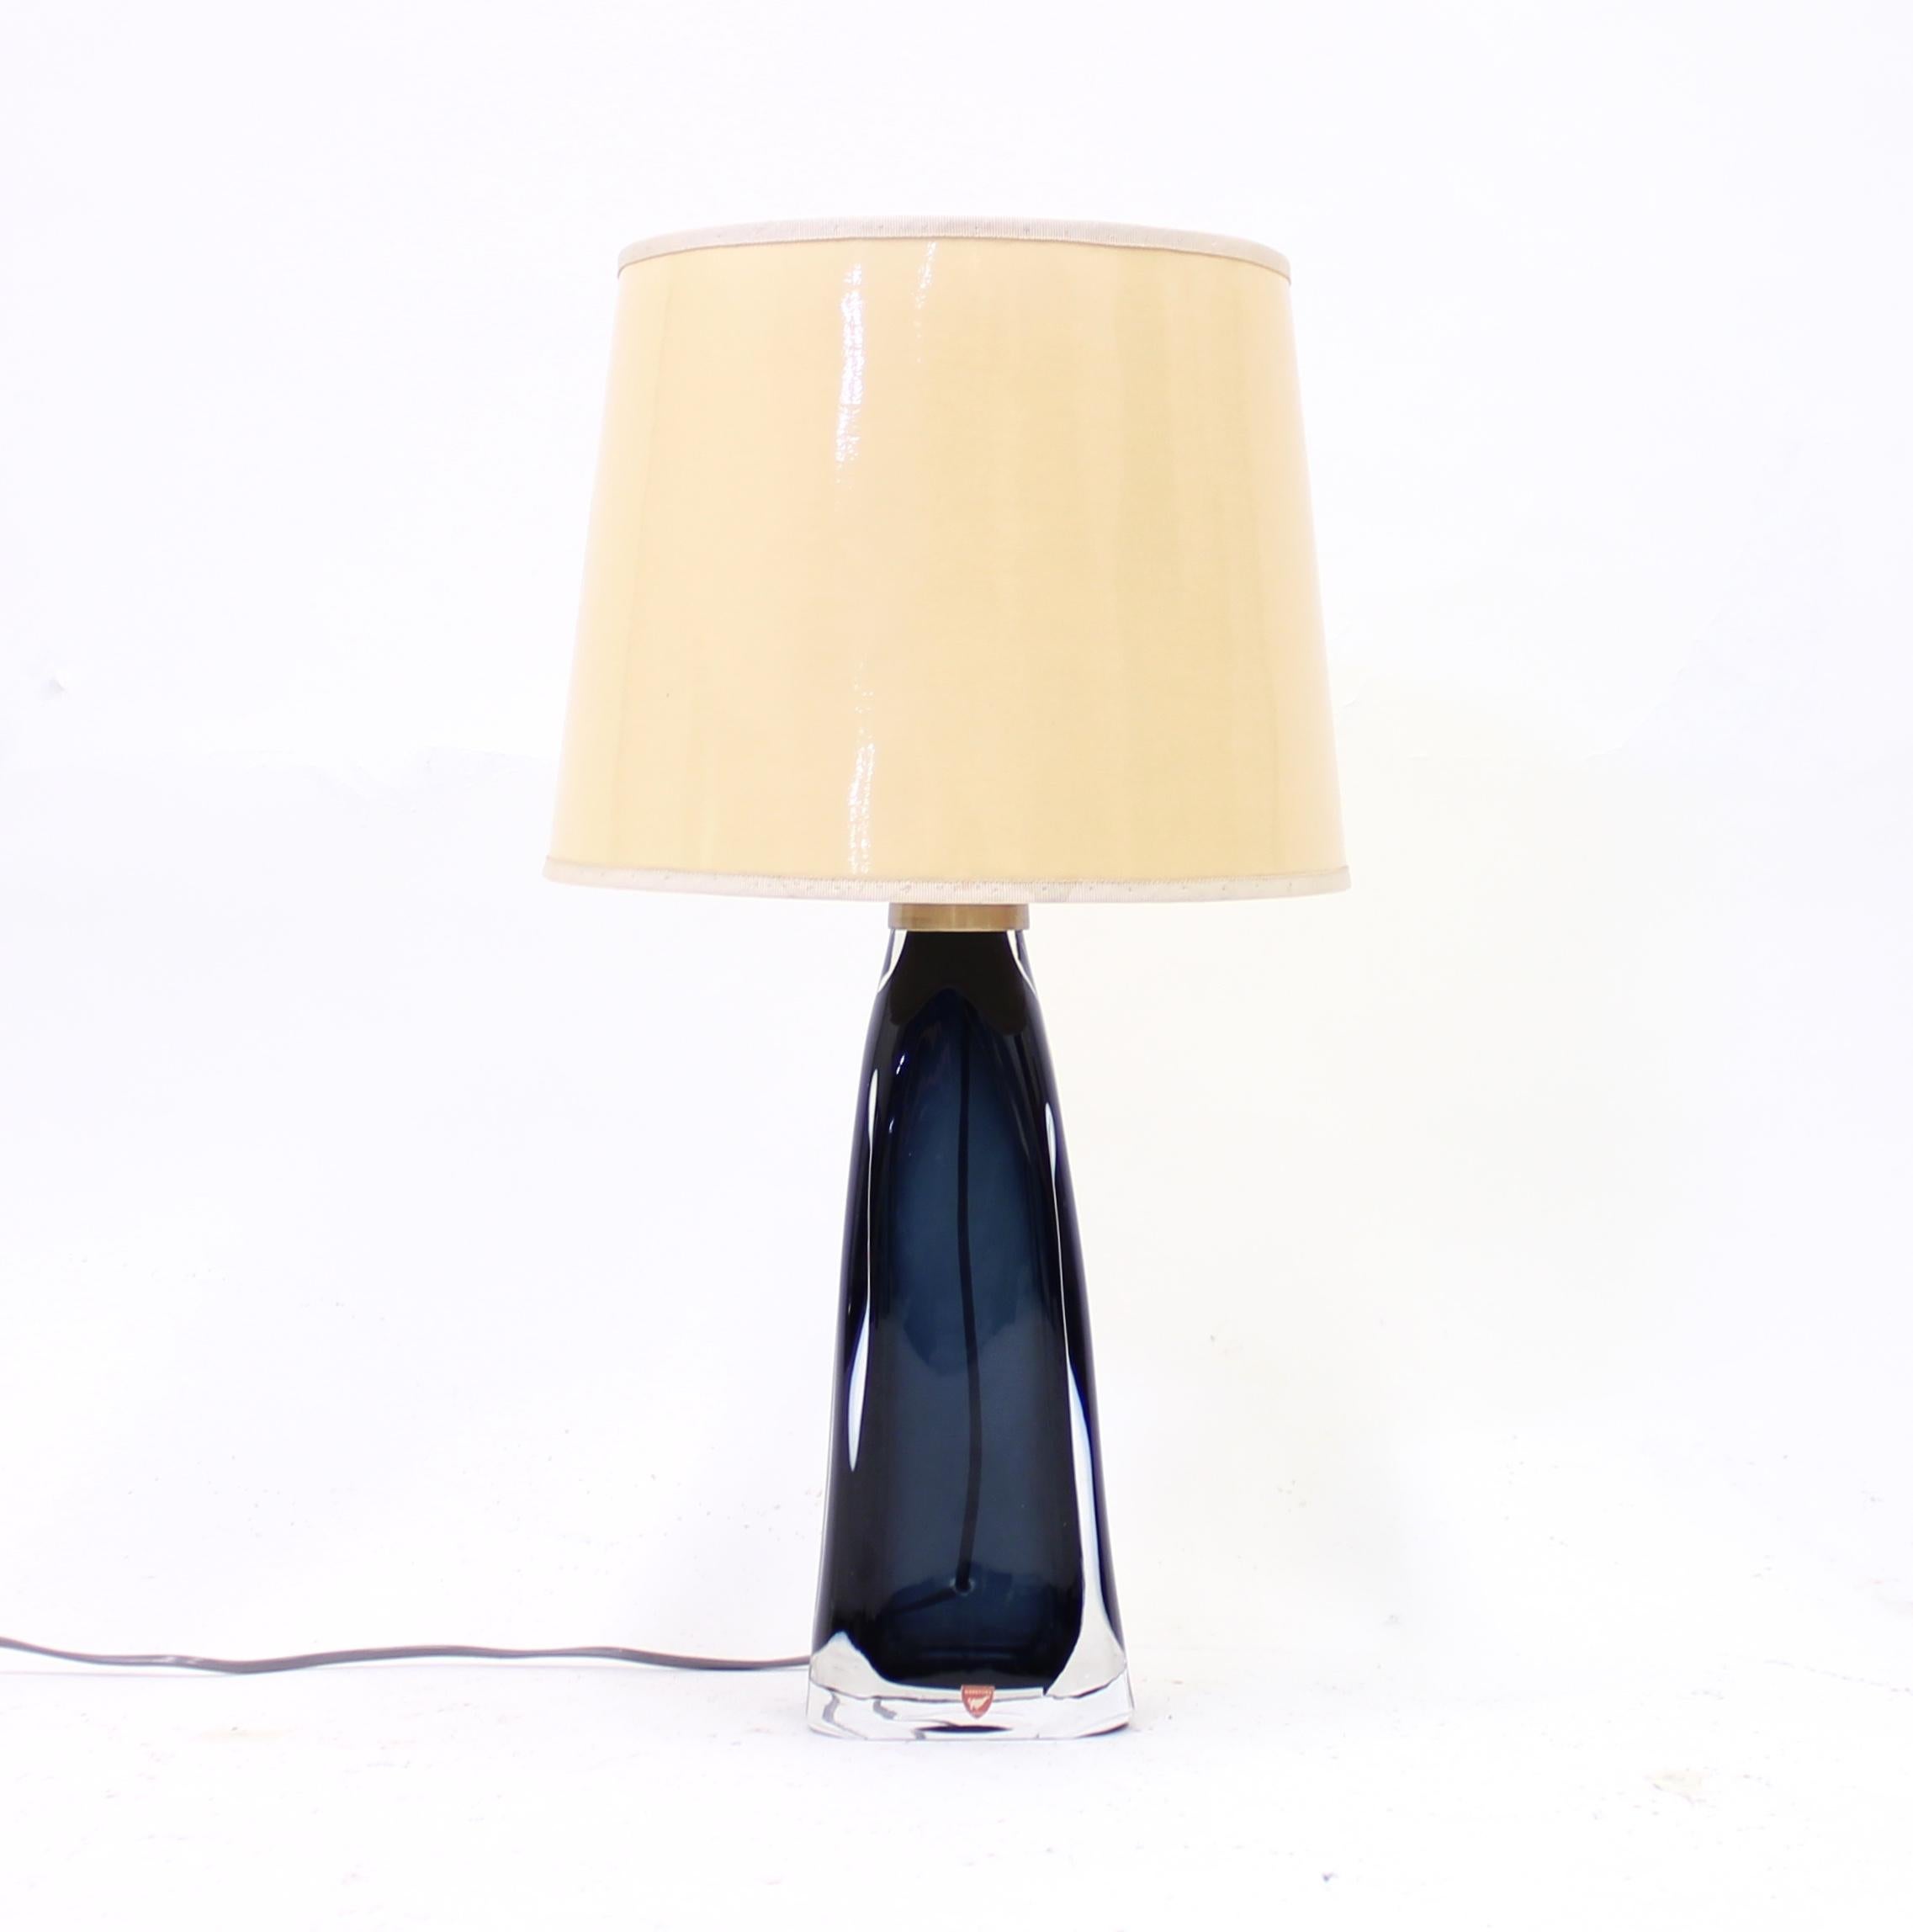 Blue glass table lamp designed by Carl Fagerlund for Swedish glass manufacturer Orrefors in the 1960s. Top of the base with brass fitting and bright yellow lacquered shade. Marked with Orrefors sticker on the front and also inscribed by Orrefors